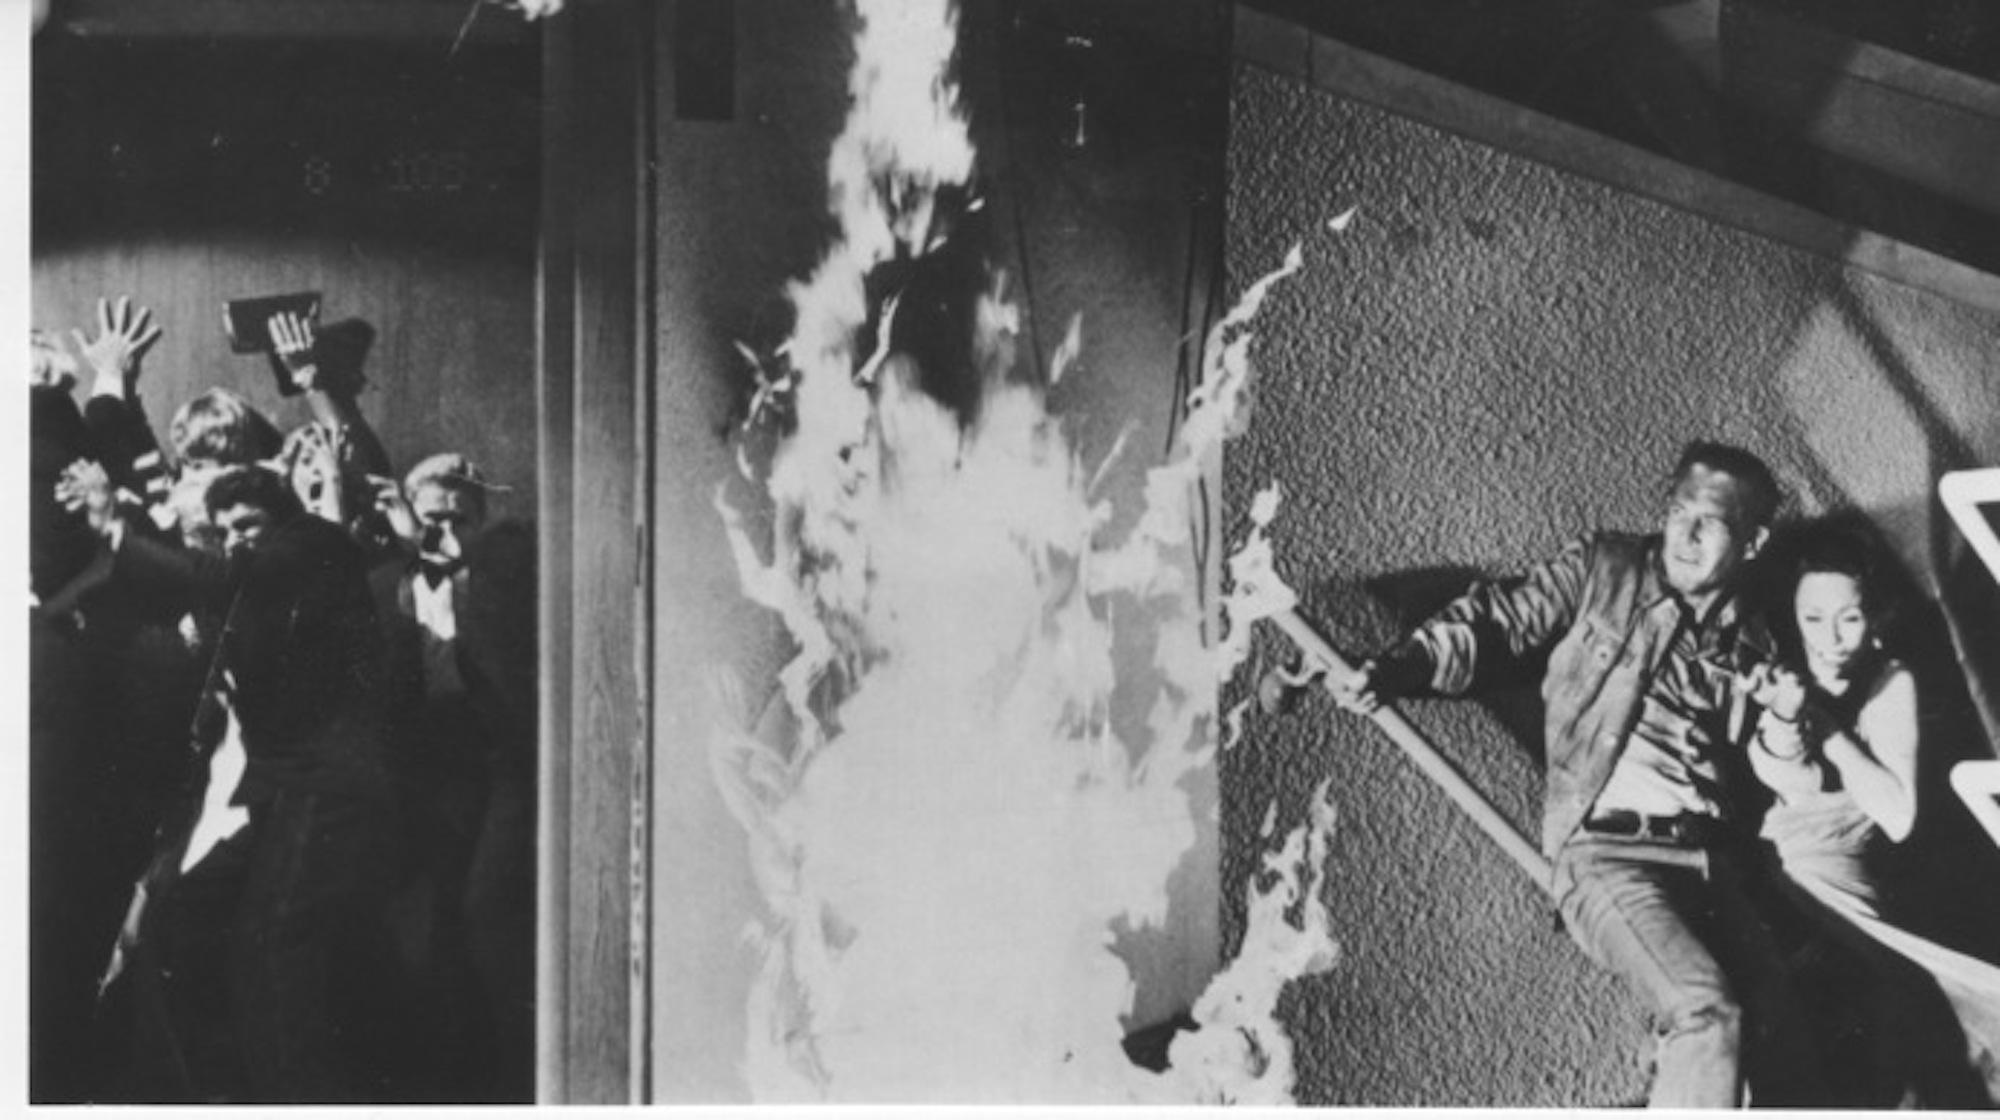 Unknown Figurative Photograph - Paul Newman on the set of "The Towering Inferno" - Vintage Photo - 1974